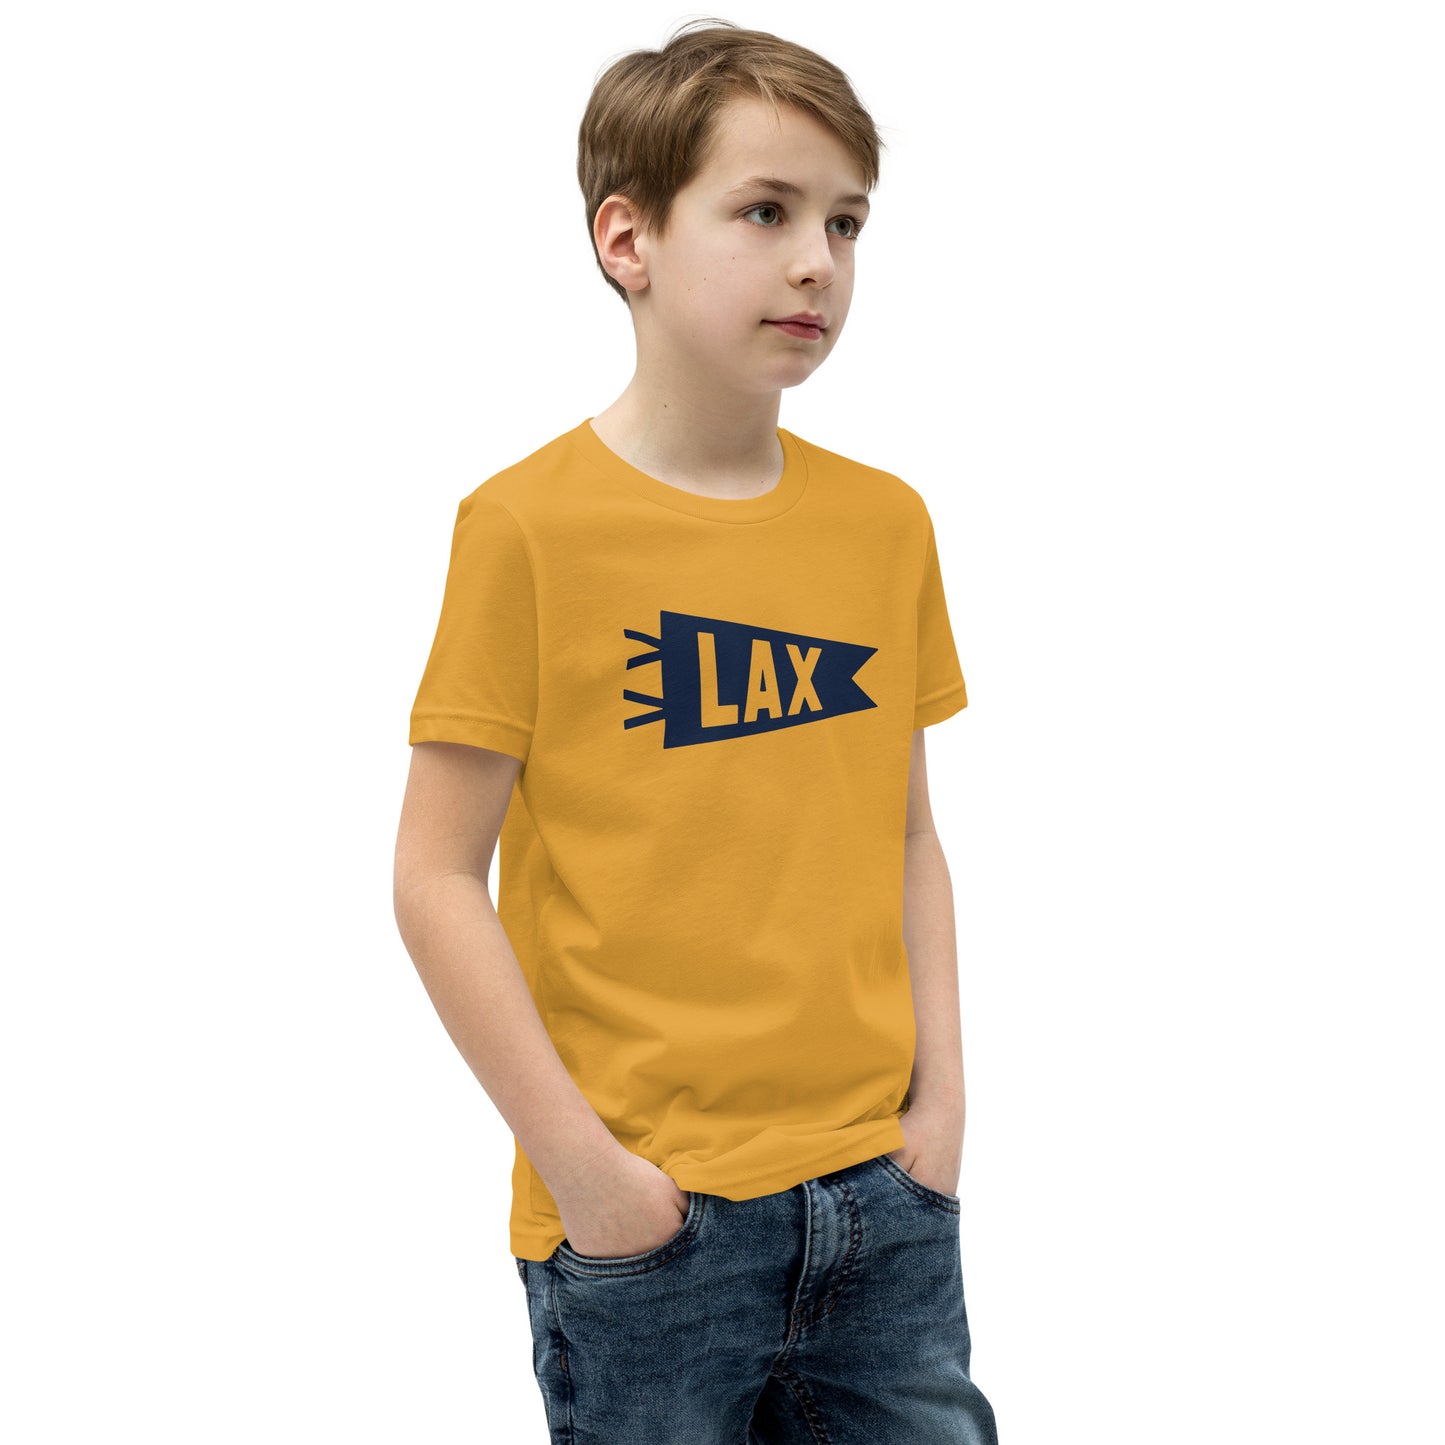 Kid's Airport Code Tee - Navy Blue Graphic • LAX Los Angeles • YHM Designs - Image 07